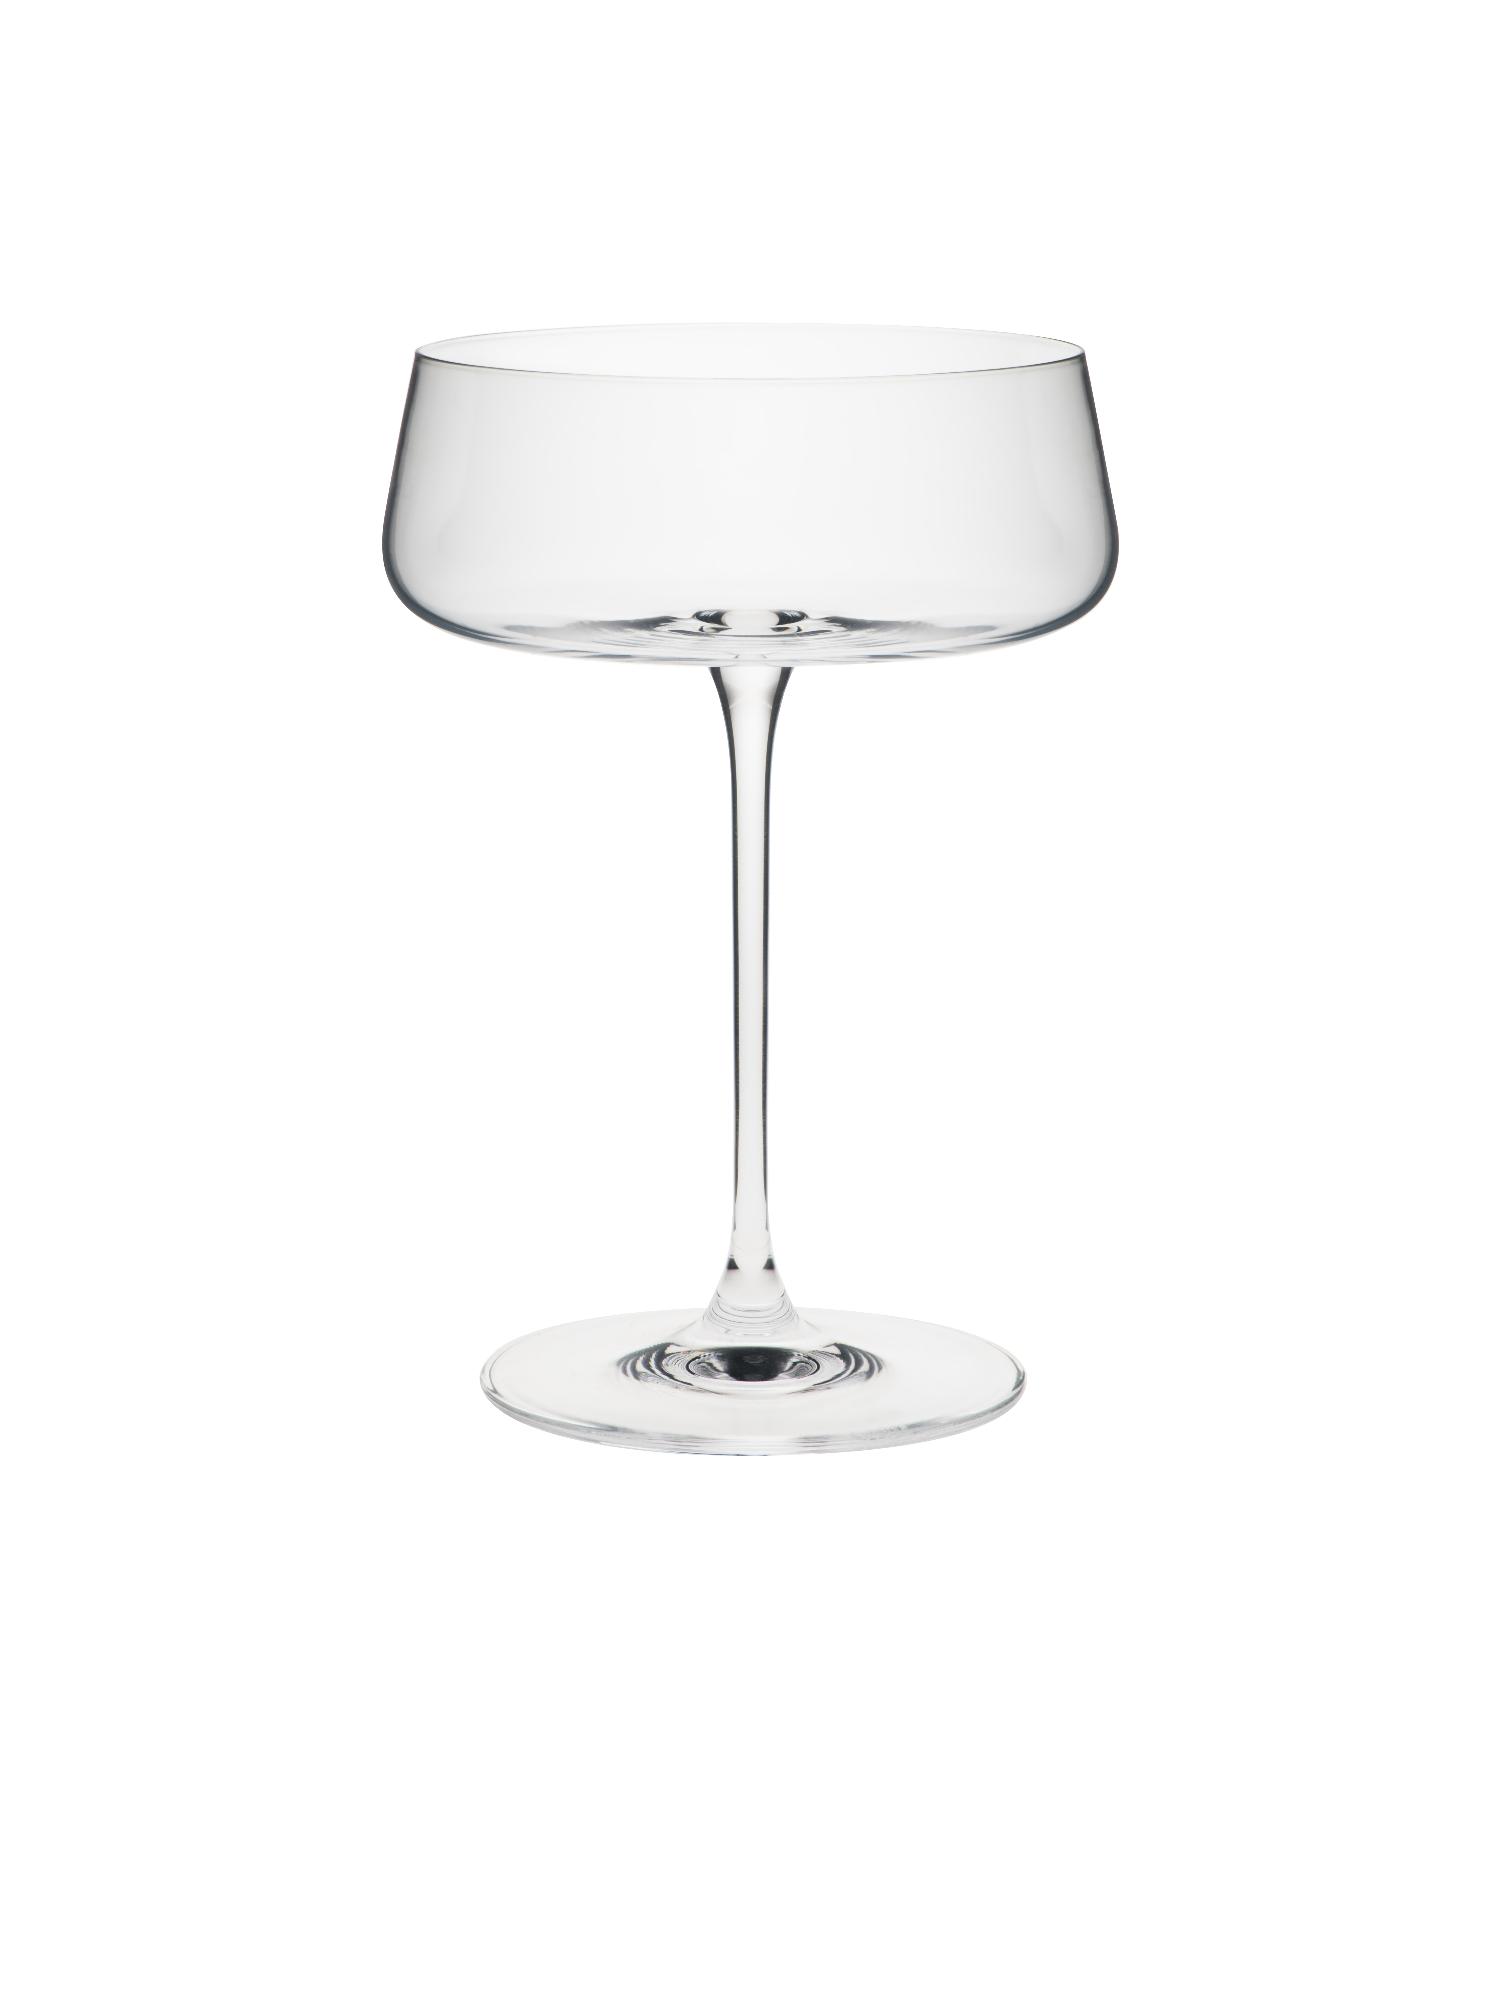 Mode cocktail coupe glass, 425ml